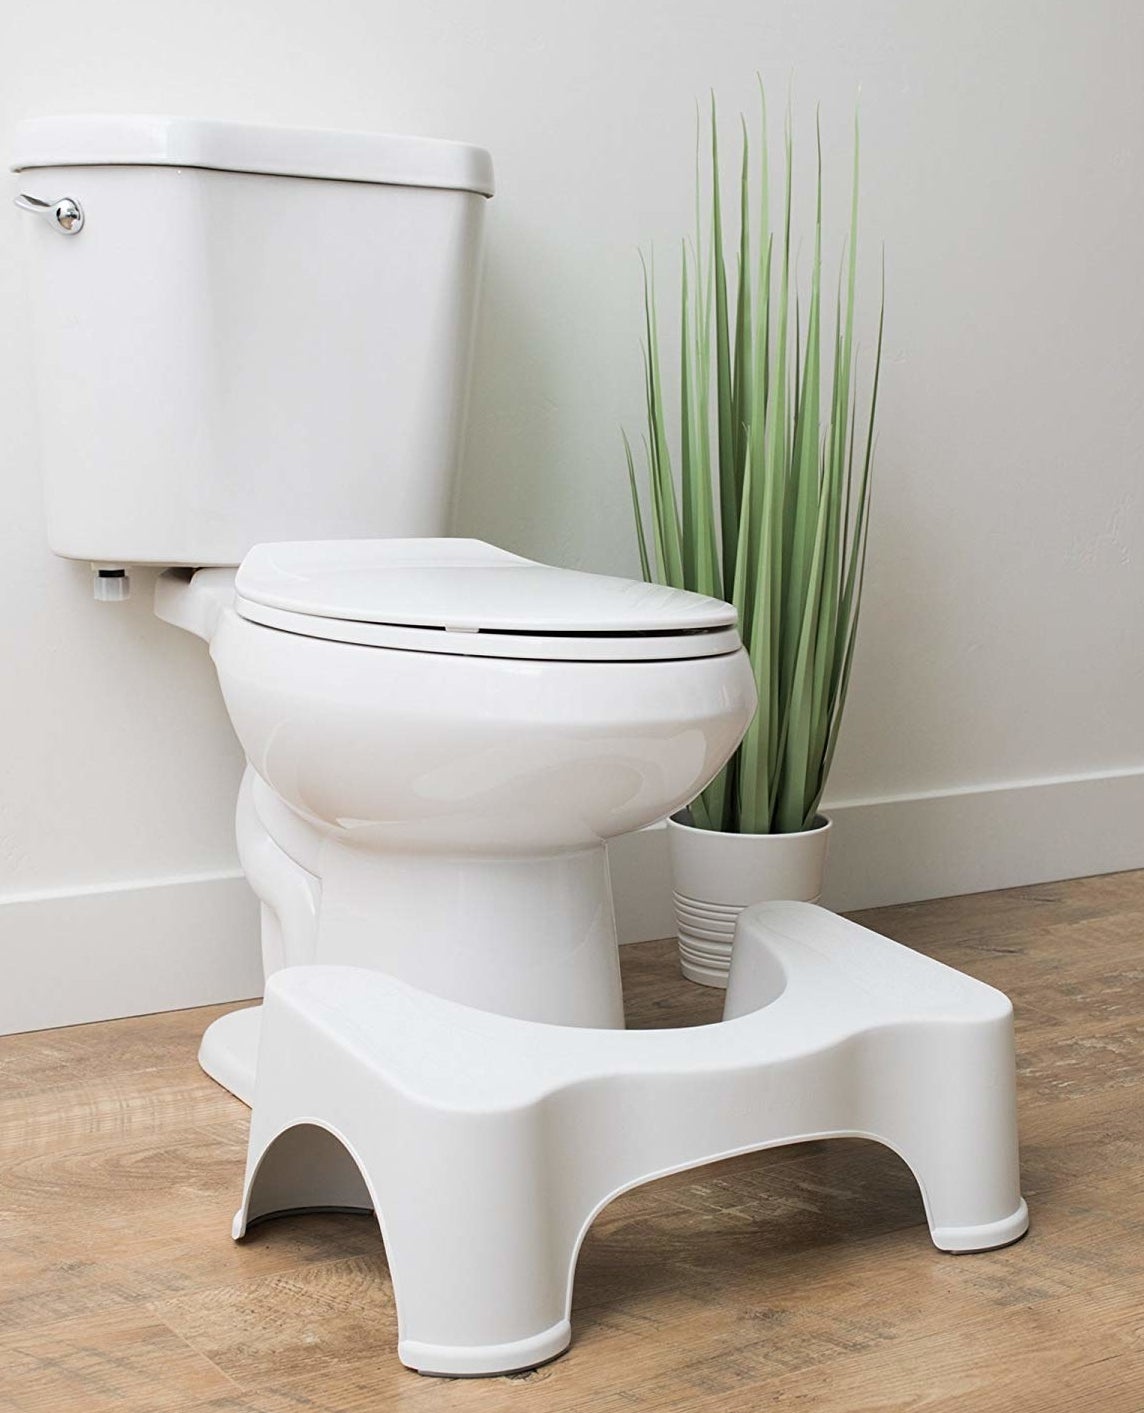 The squatty potty in front of a toilet 